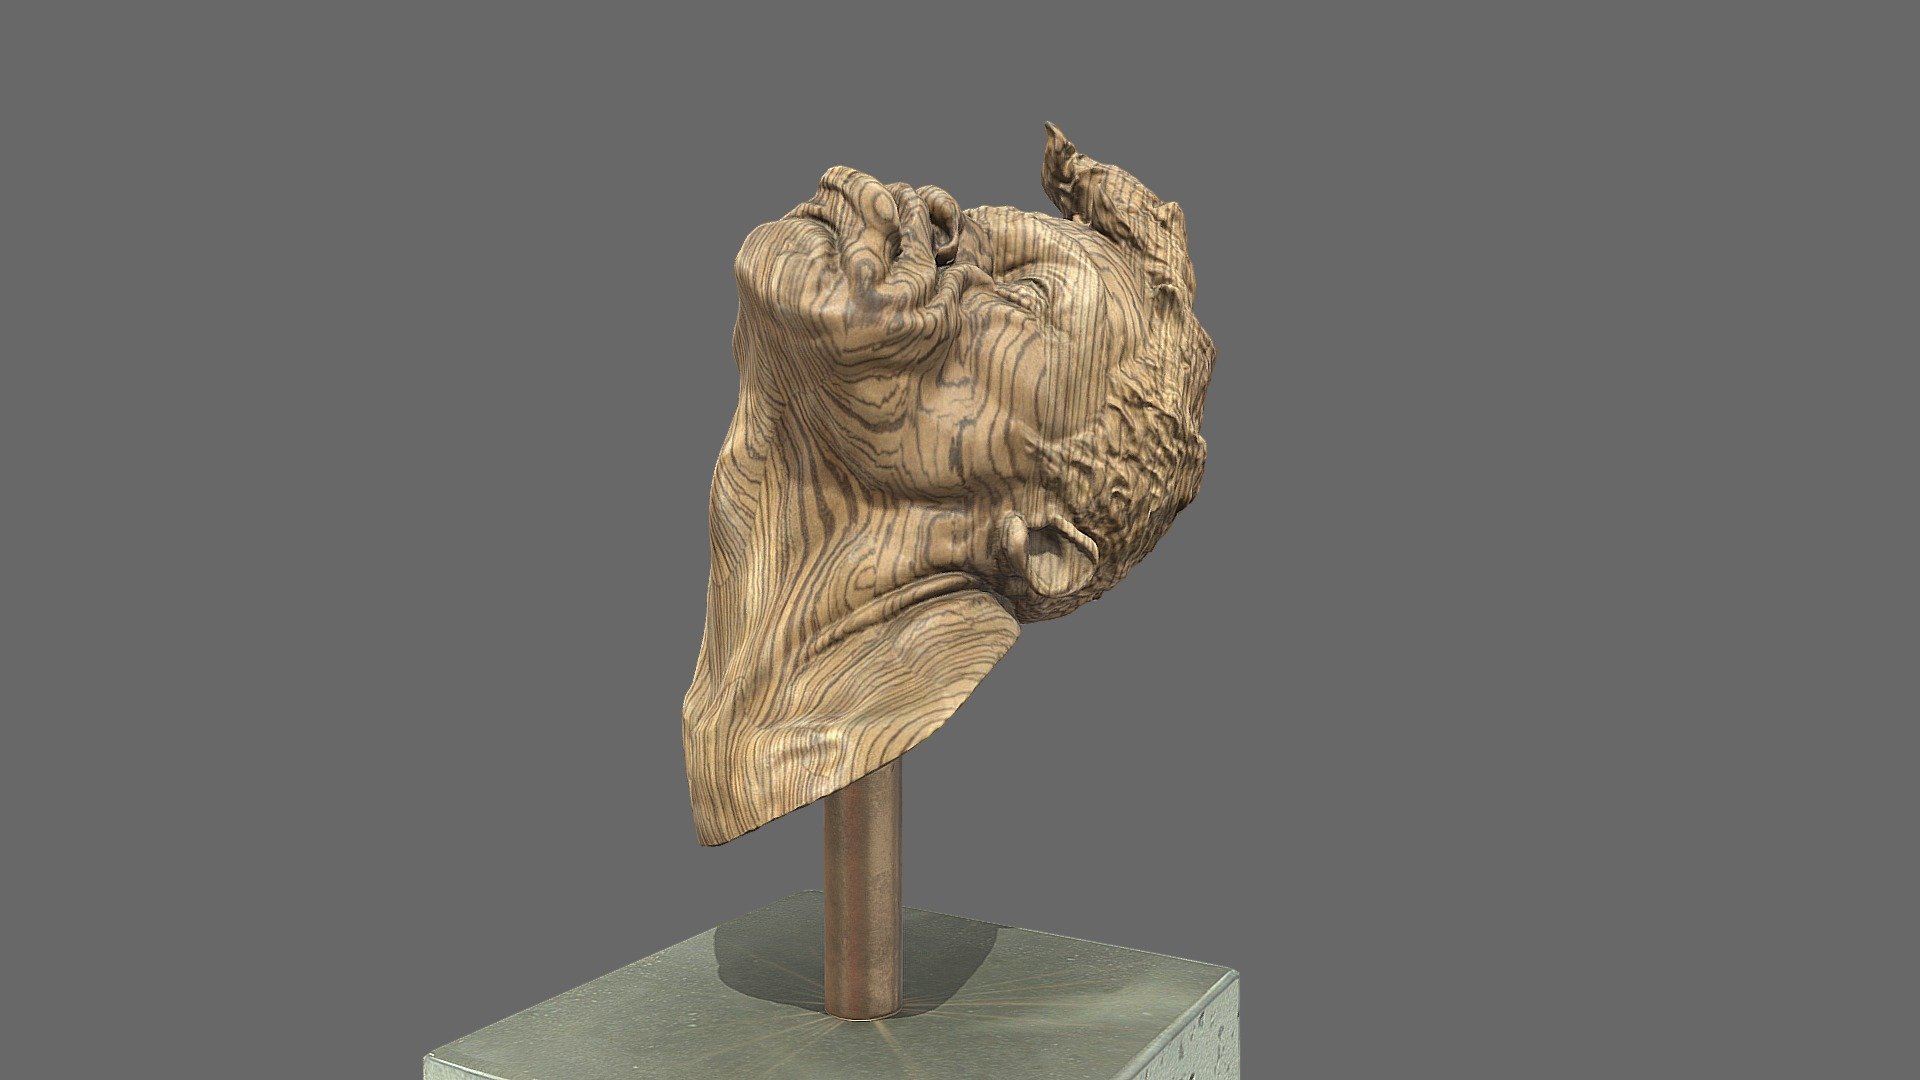 1 of 5 sculptures in a series of Busts that I made out of various hardwoods.  The series is called the Phantom Punch.  This bust represents the uppercut.  As a fan of Boxing I wanted to capture that moment of impact with the missing fist.  This is a scan of the real sculpture, the sculpture is about 17